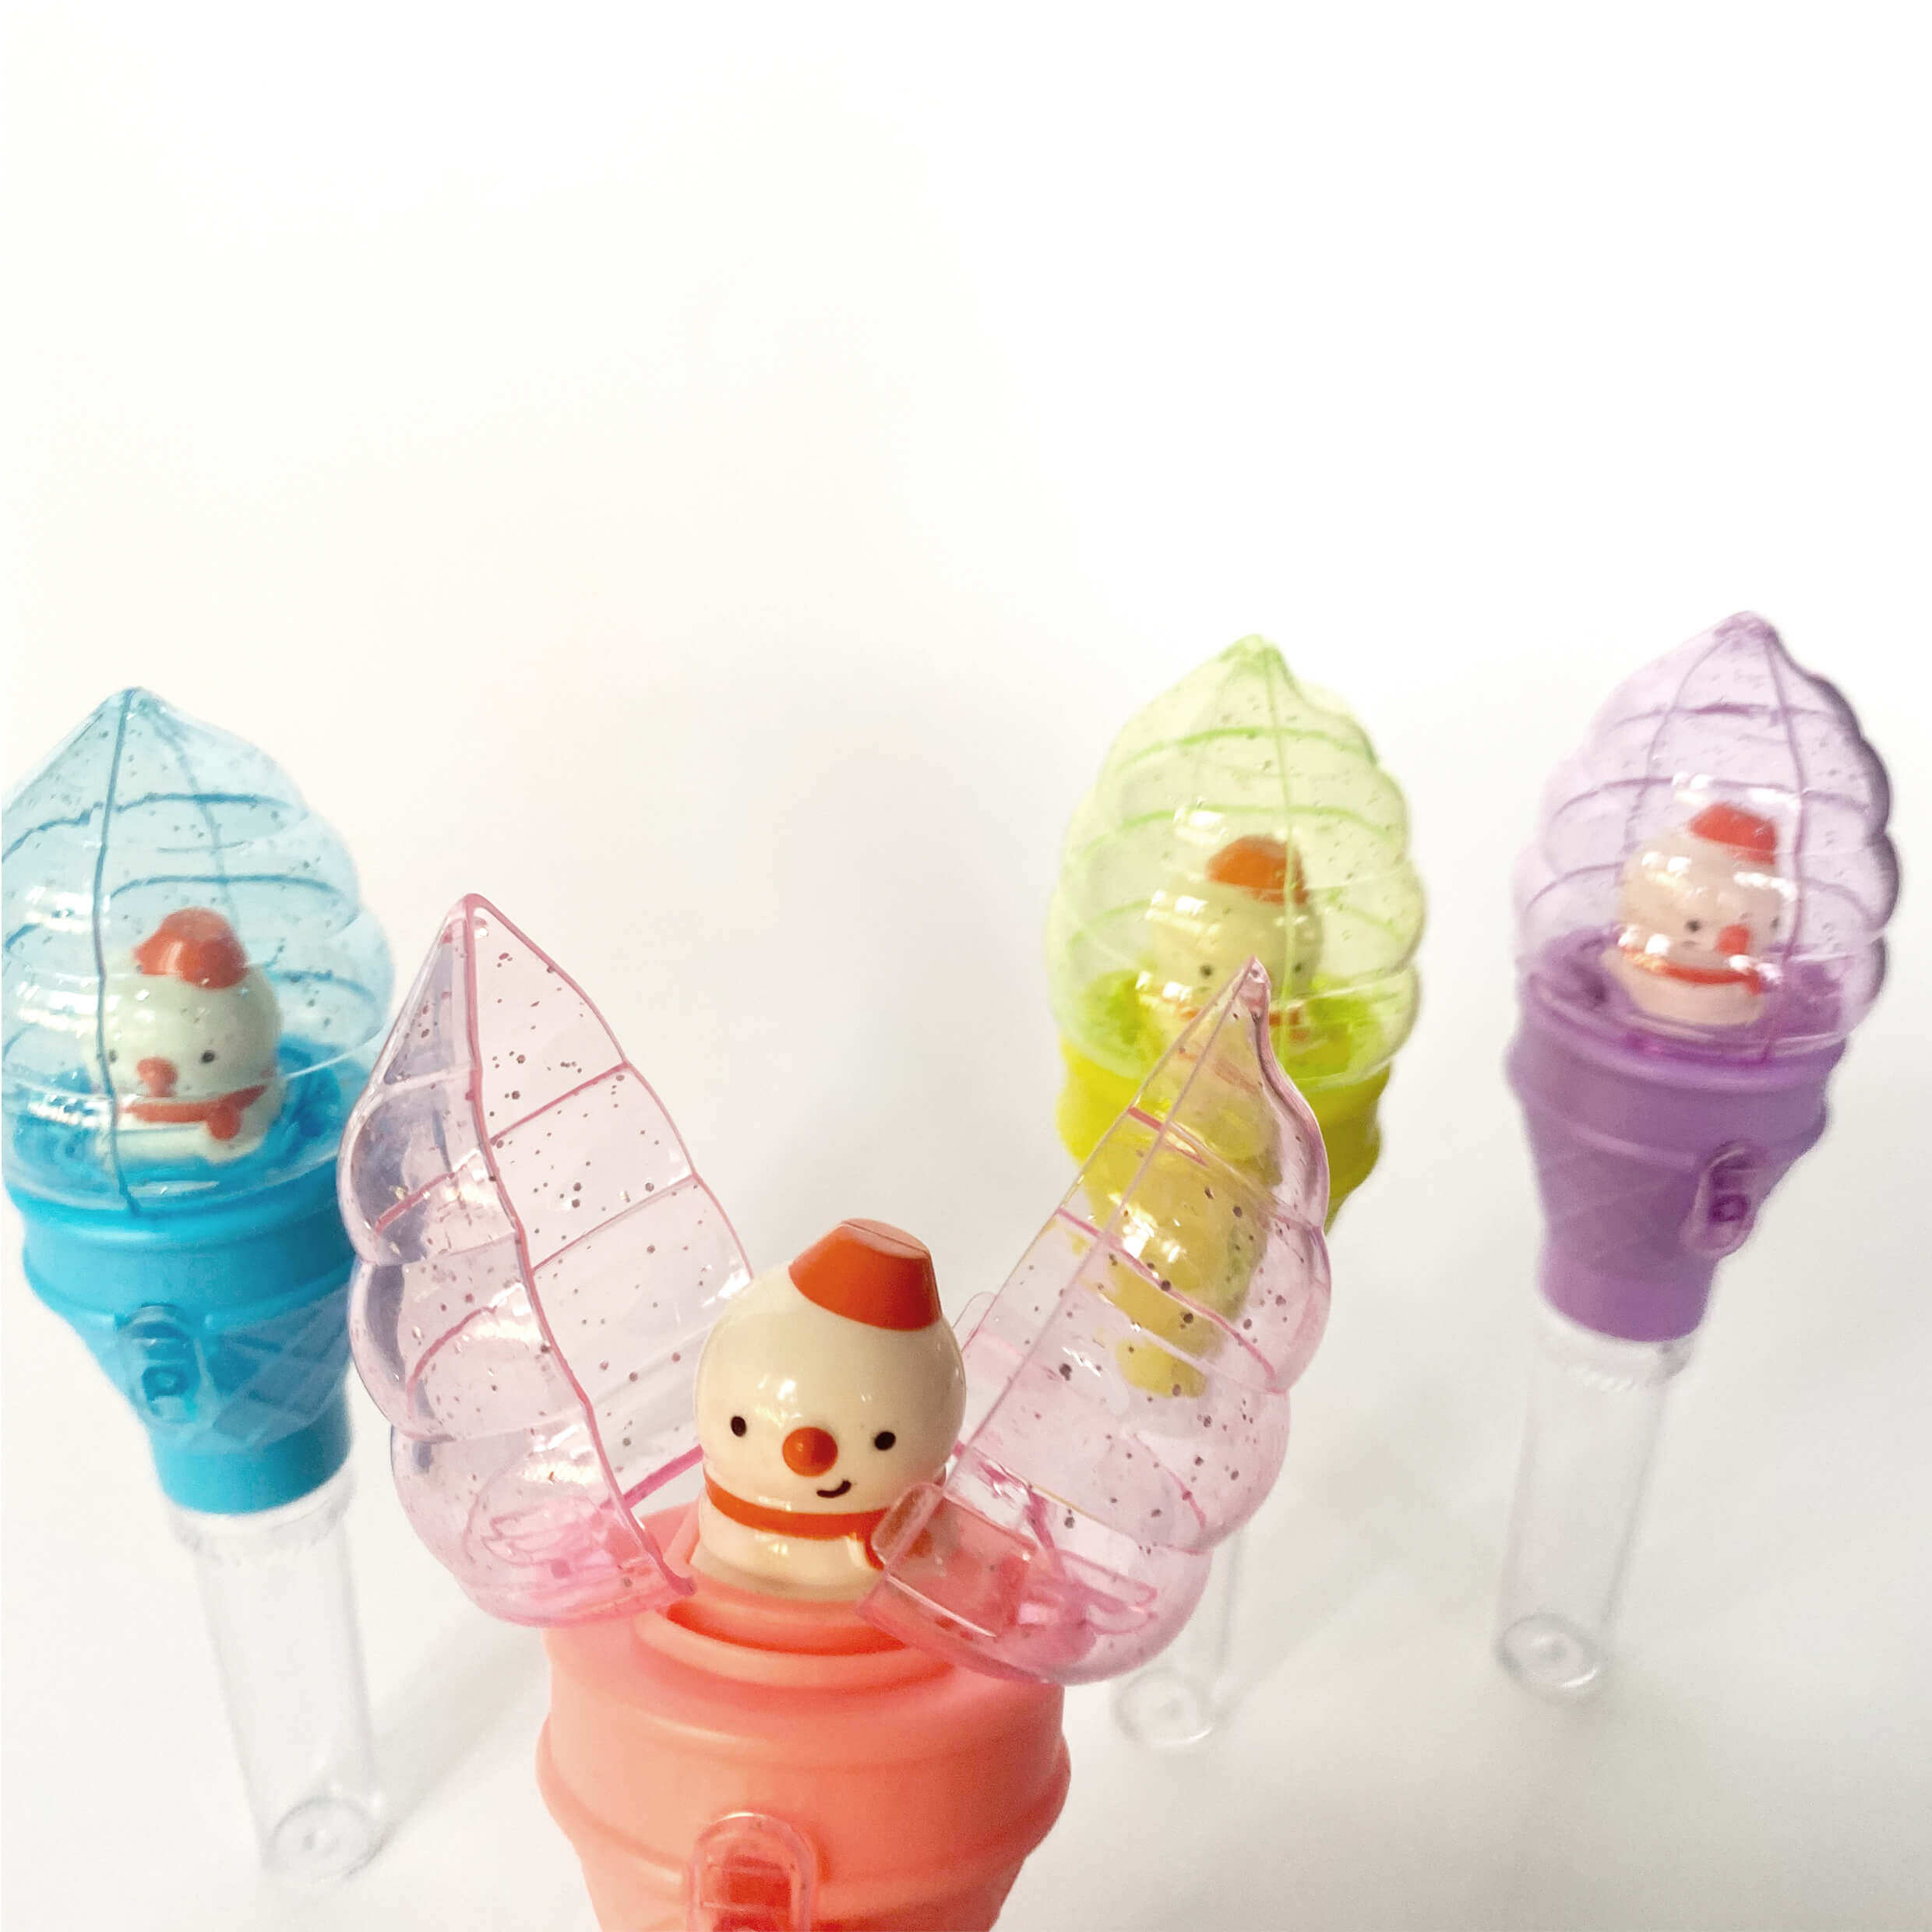 plastic candy tubes wholesale, cute candy dispenser, personalized candy dispenser